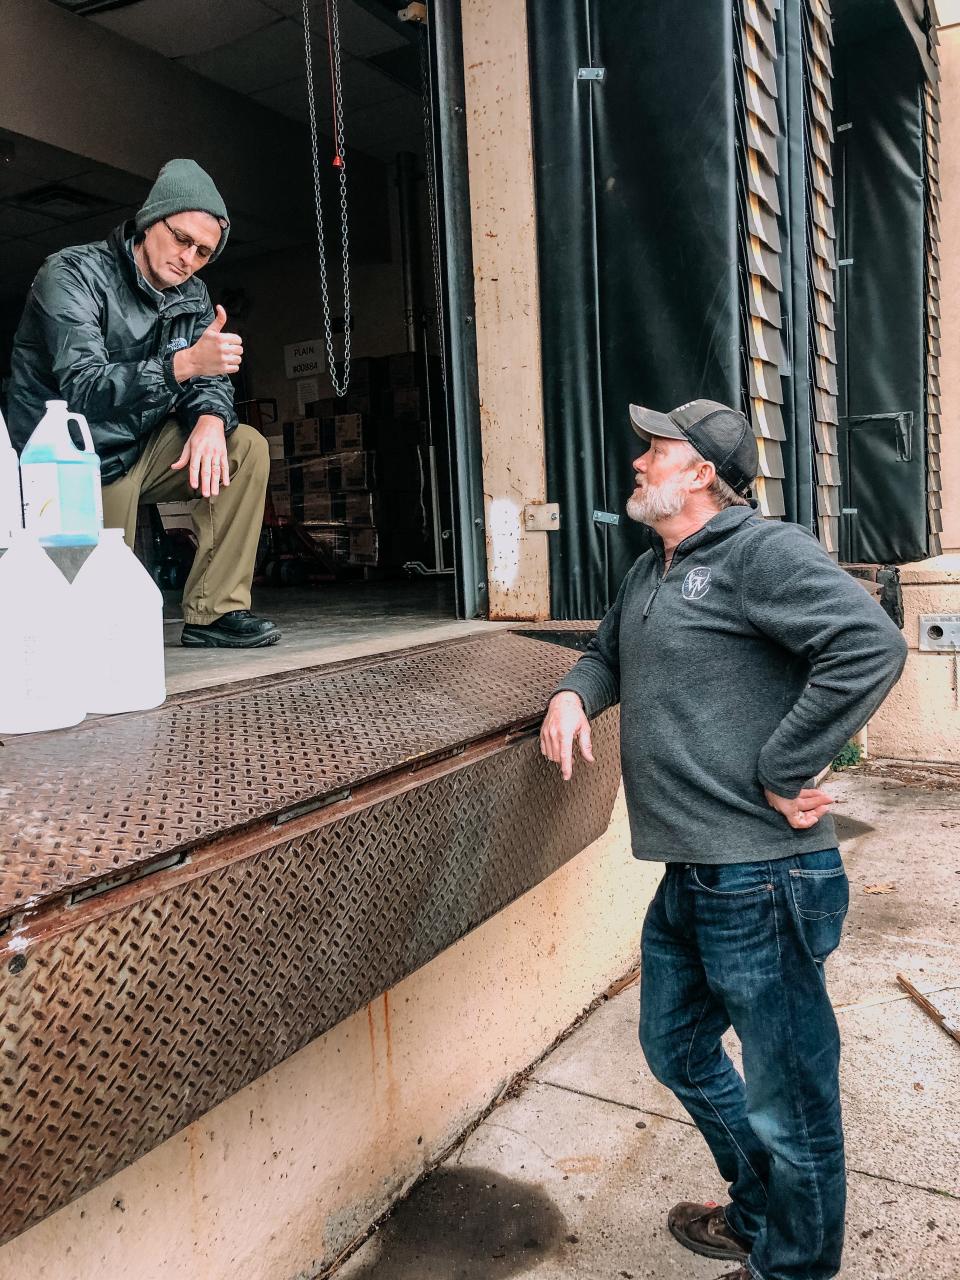 Boyle County Health Department Director Brent Blevins, left, talks to Wilderness Trail Distillery co-owner Shane Baker. Wilderness Trail Distillery plans to make 500 gallons of hand sanitizer a week for health care workers in Danville.